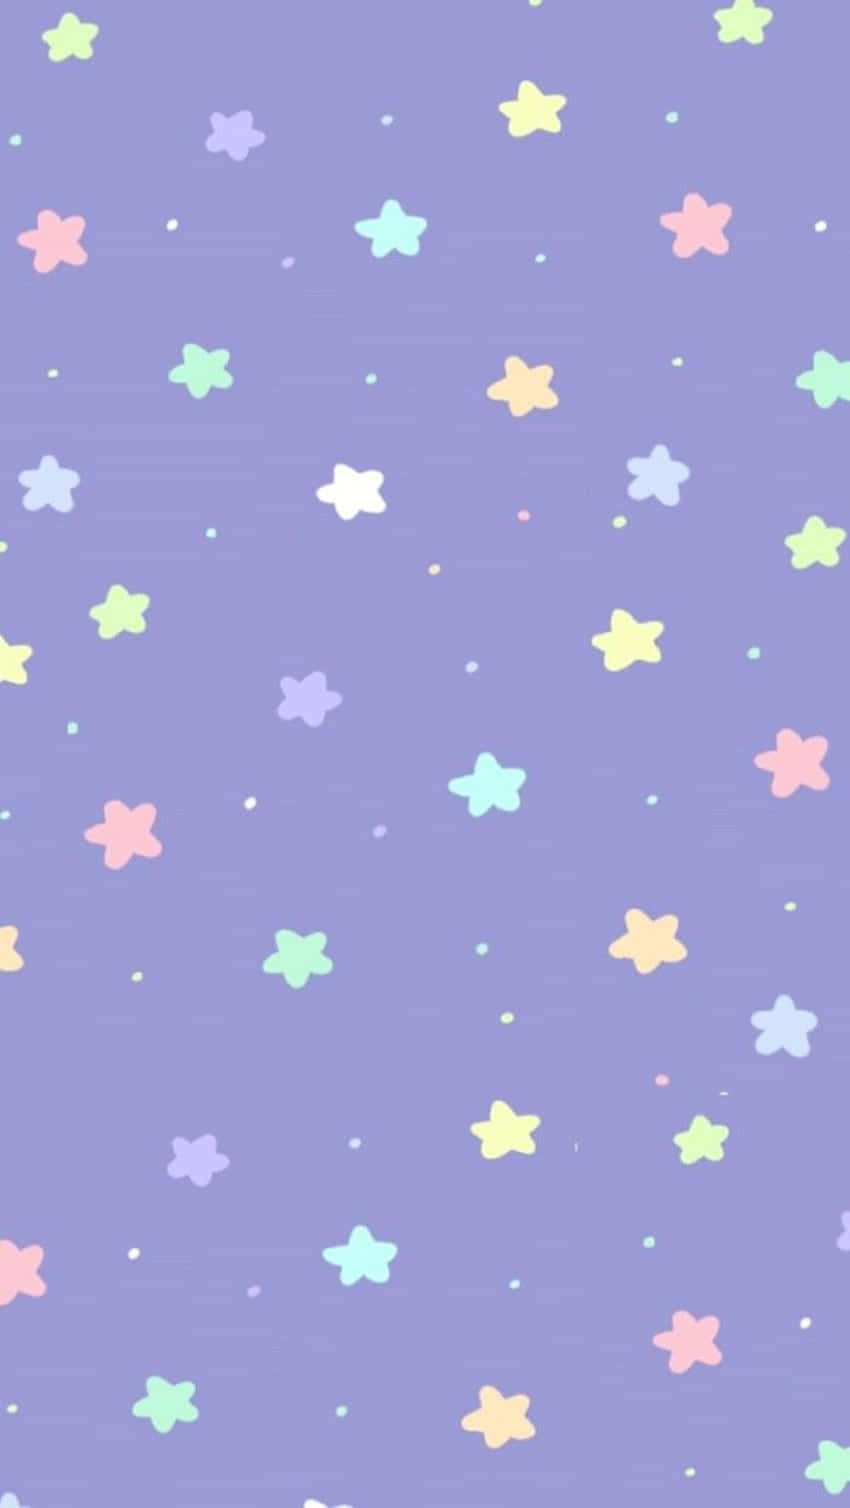 A Purple Background With Stars On It Wallpaper